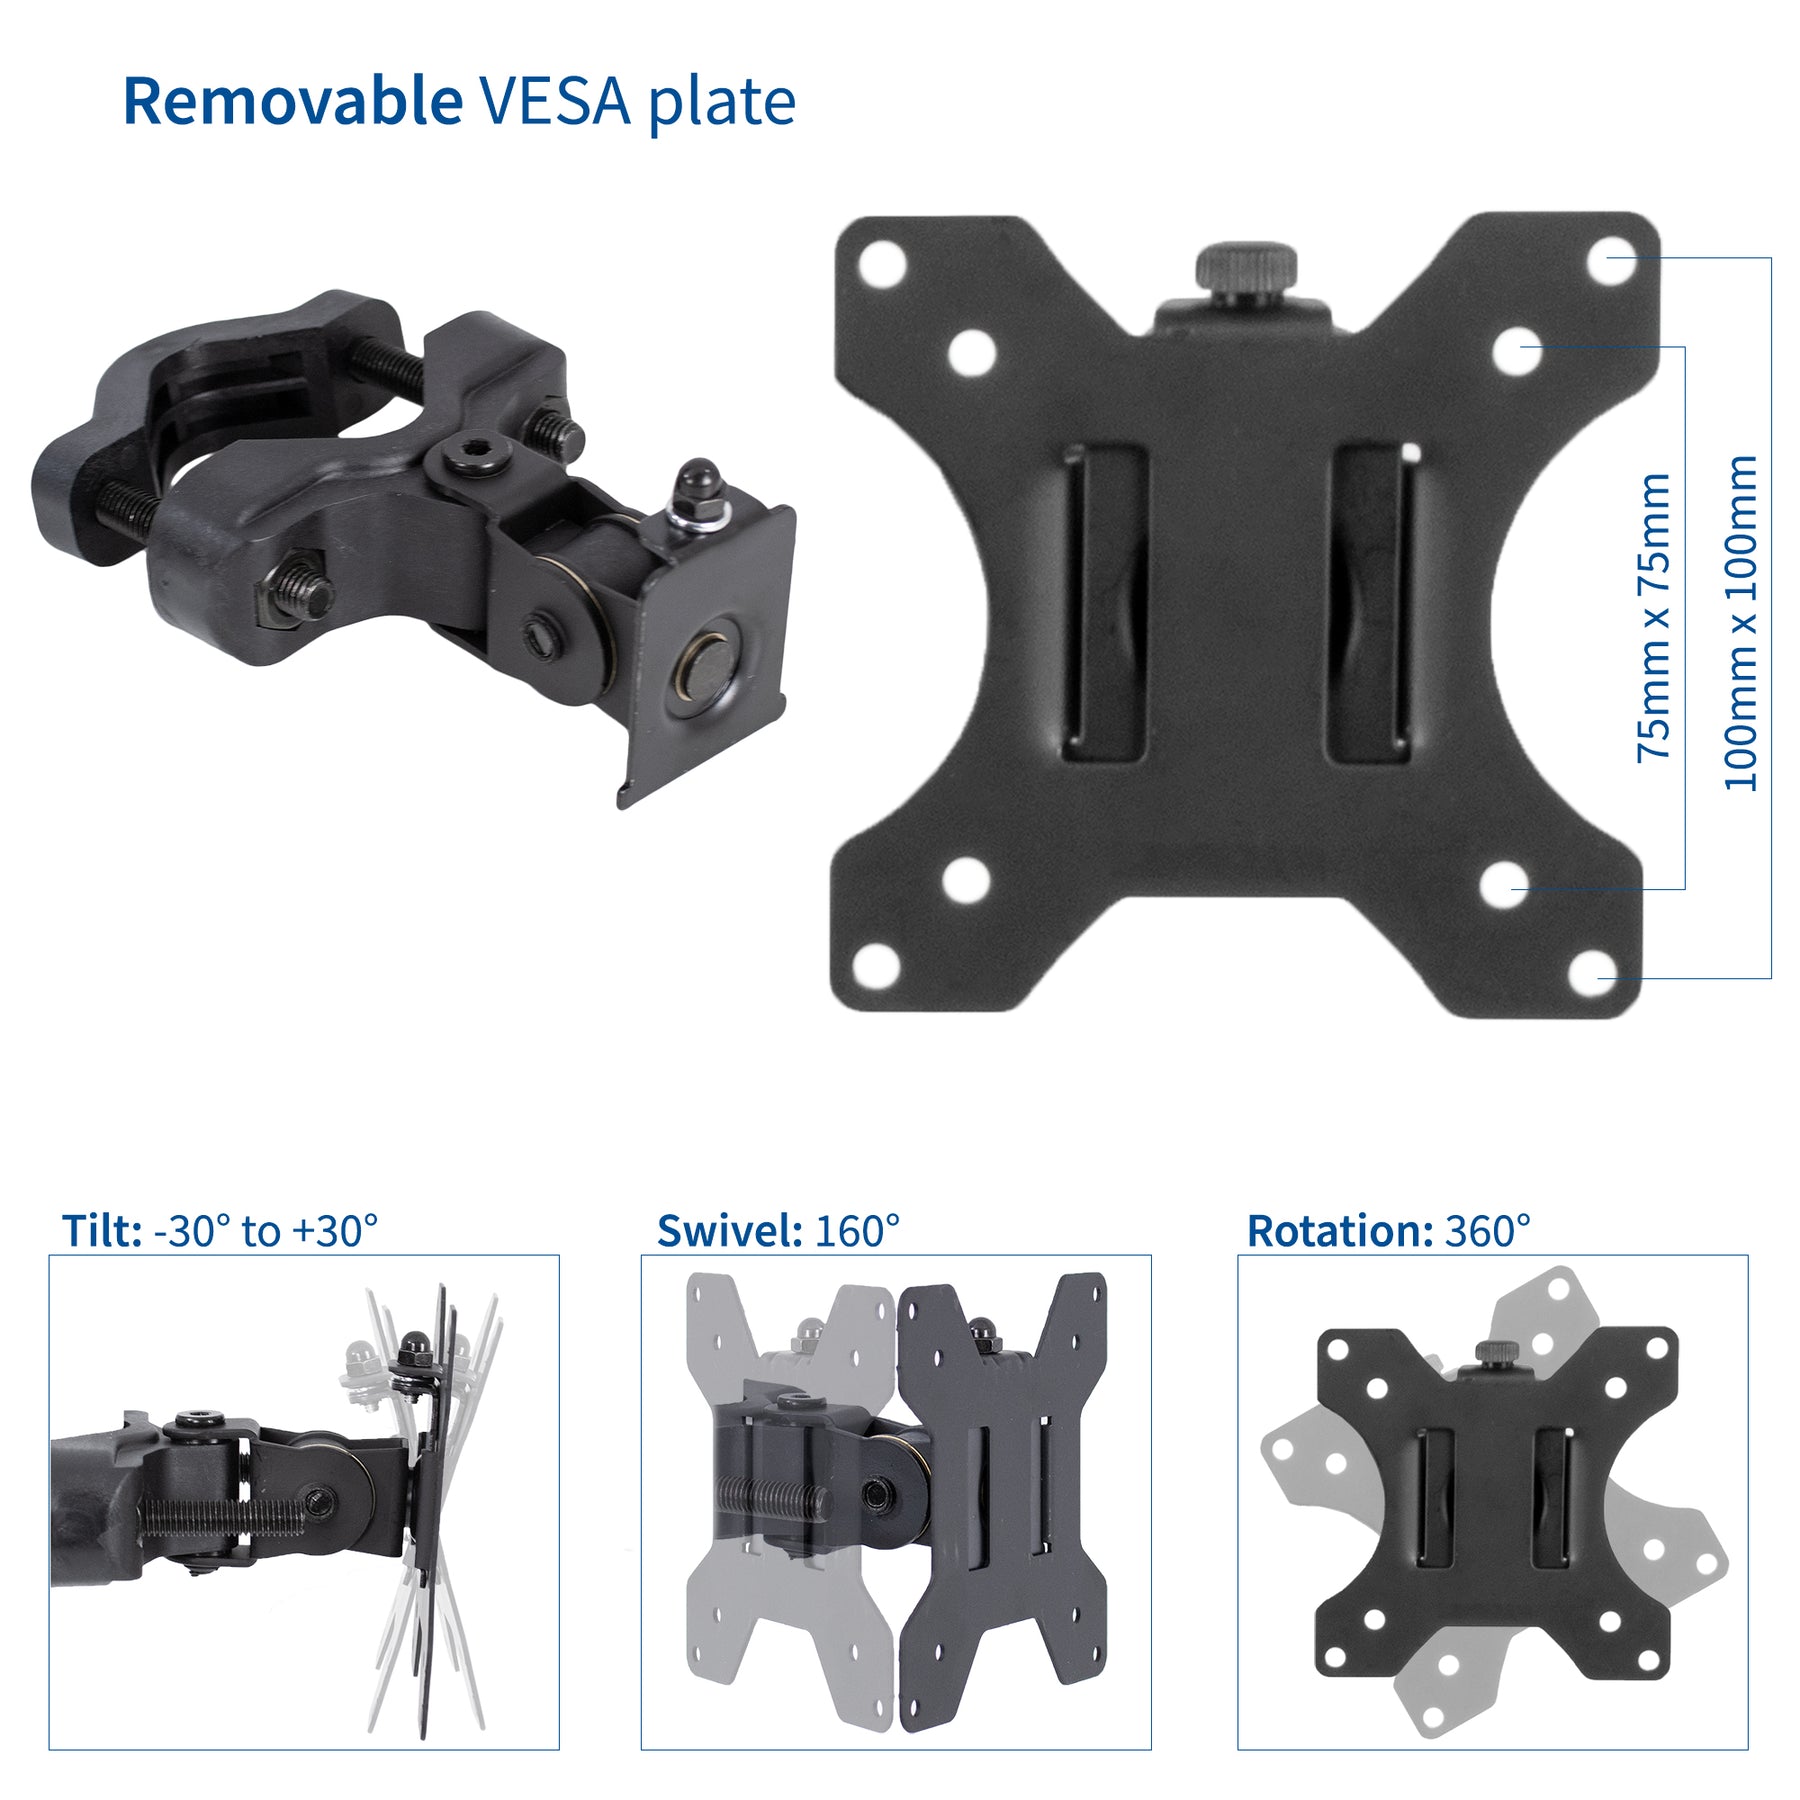 VIVO Steel VESA Bracket 75x75 and 100x100 Mounting for Computer Monitor,  Quick Release Removable VESA Plate, White, PT-SD-VA01AW